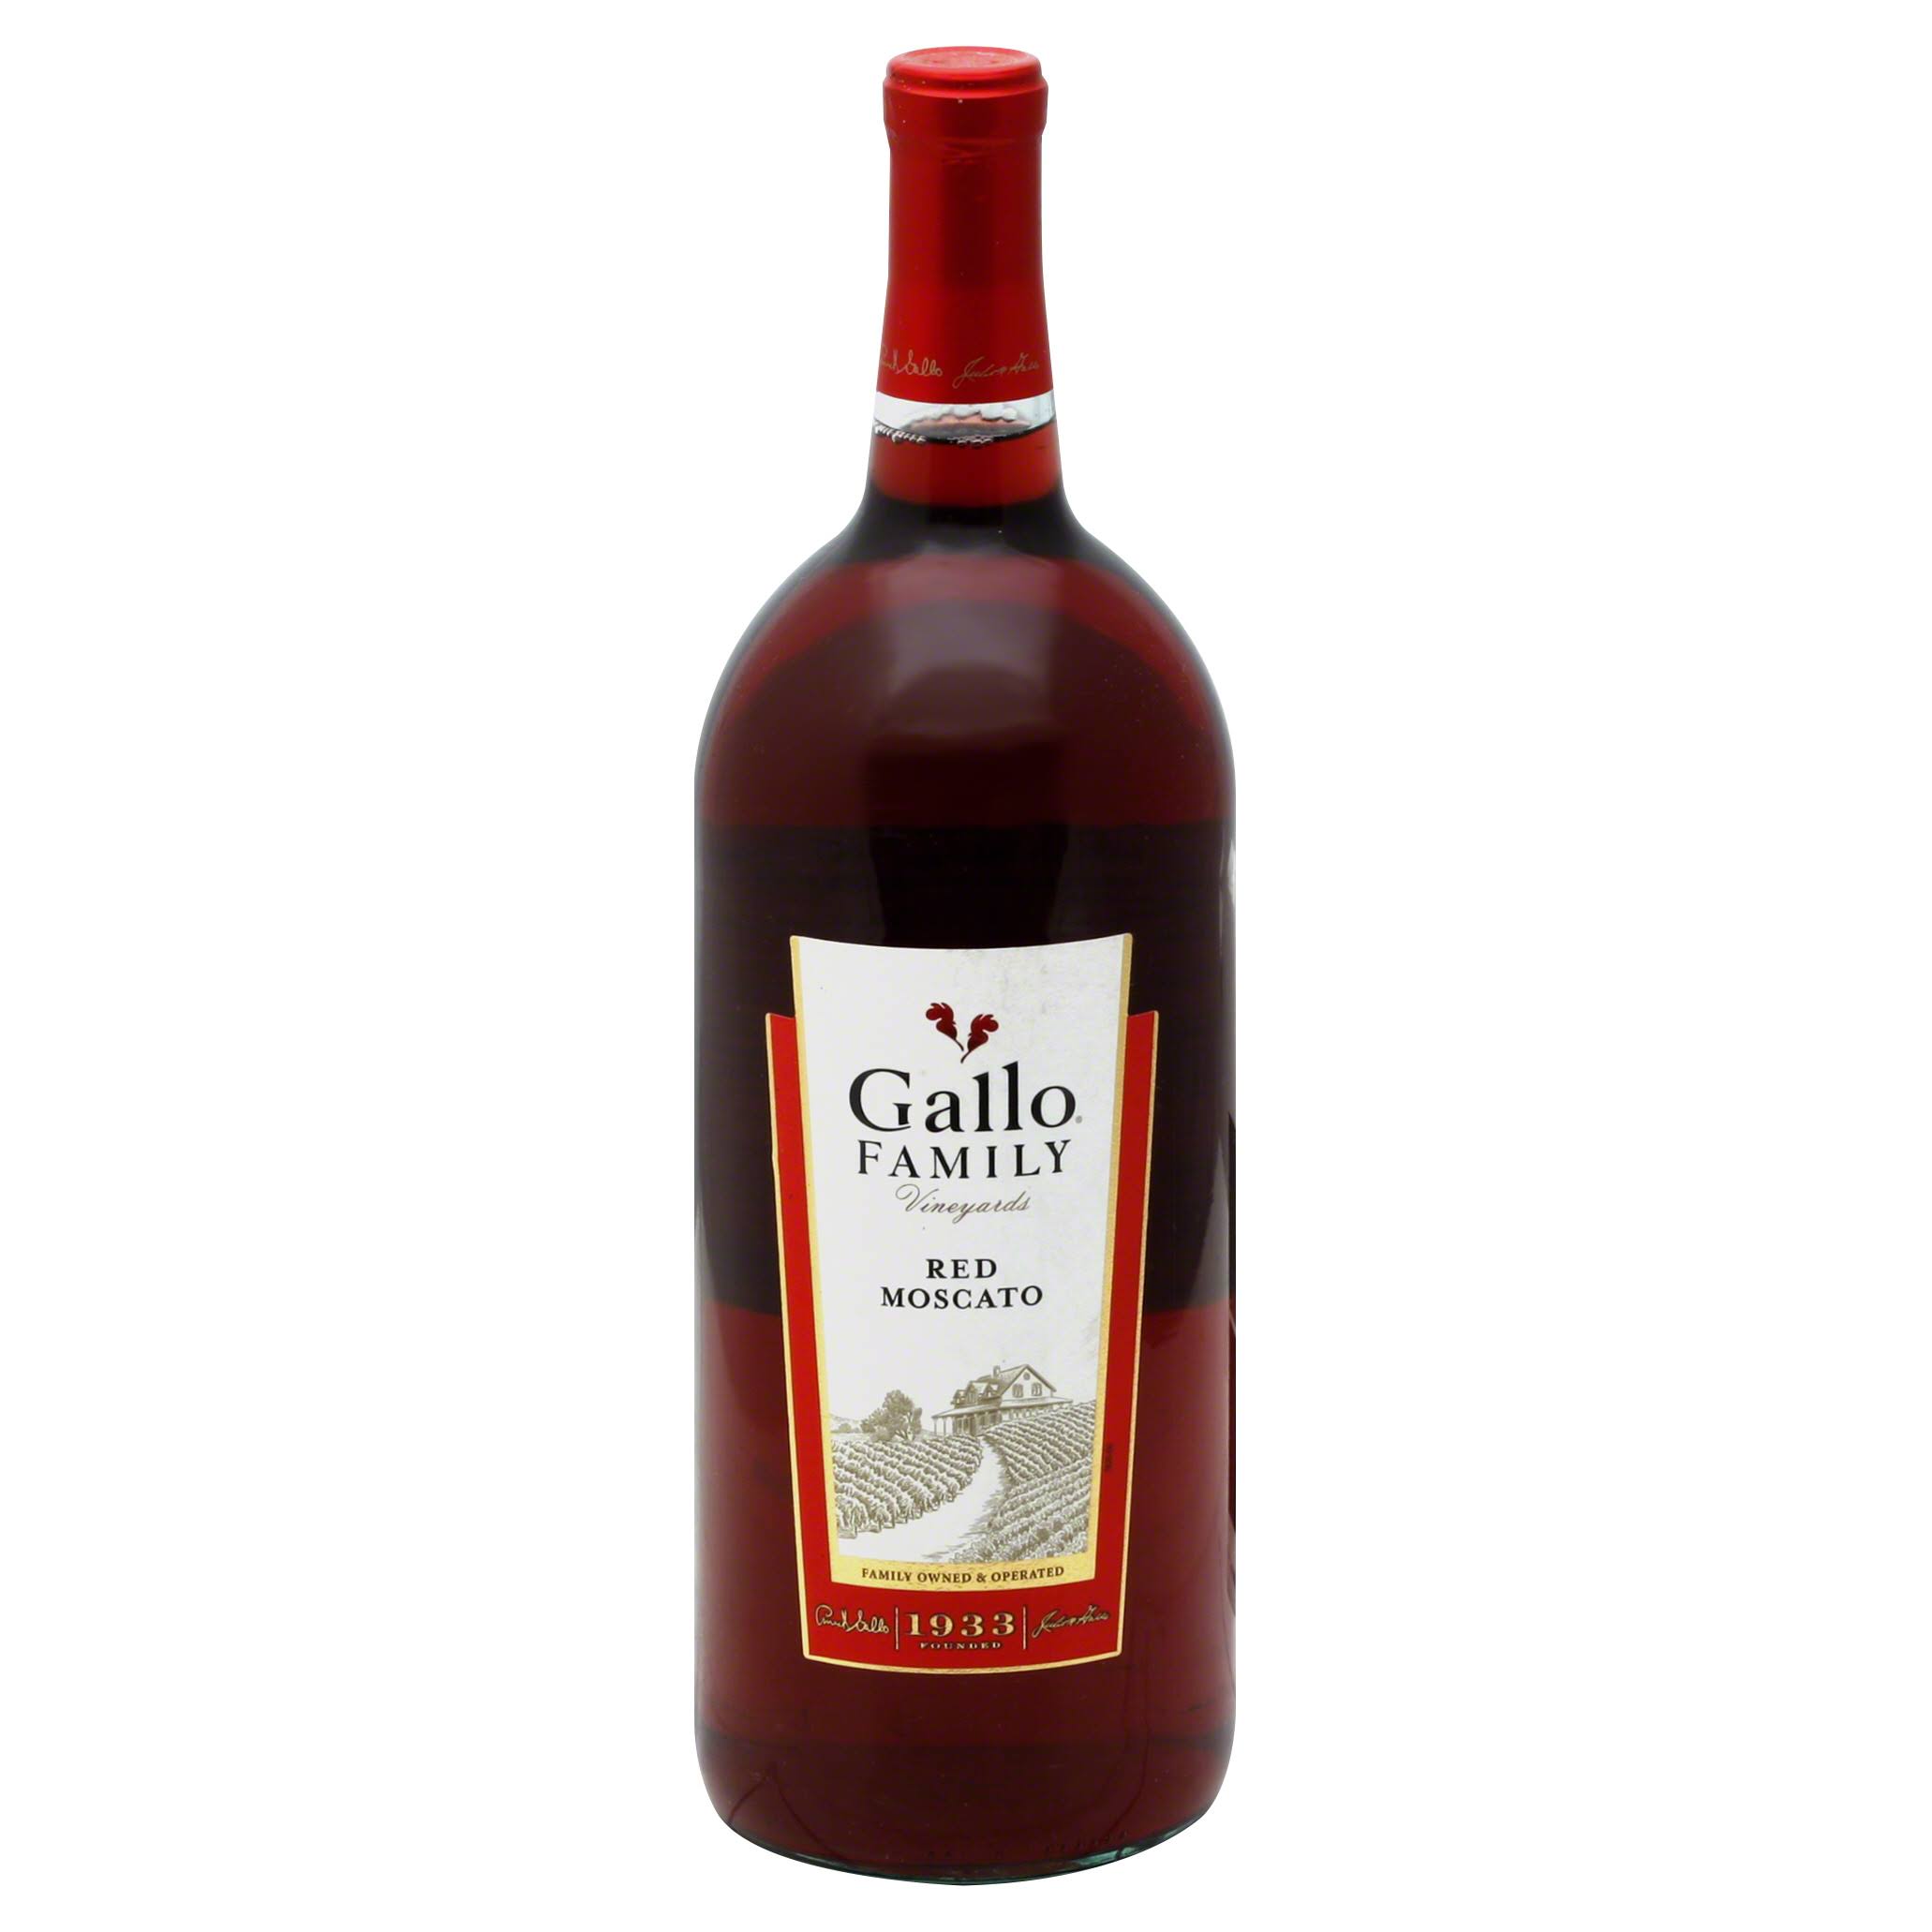 Gallo Family Moscato, Red, Argentina - 1.5 lt